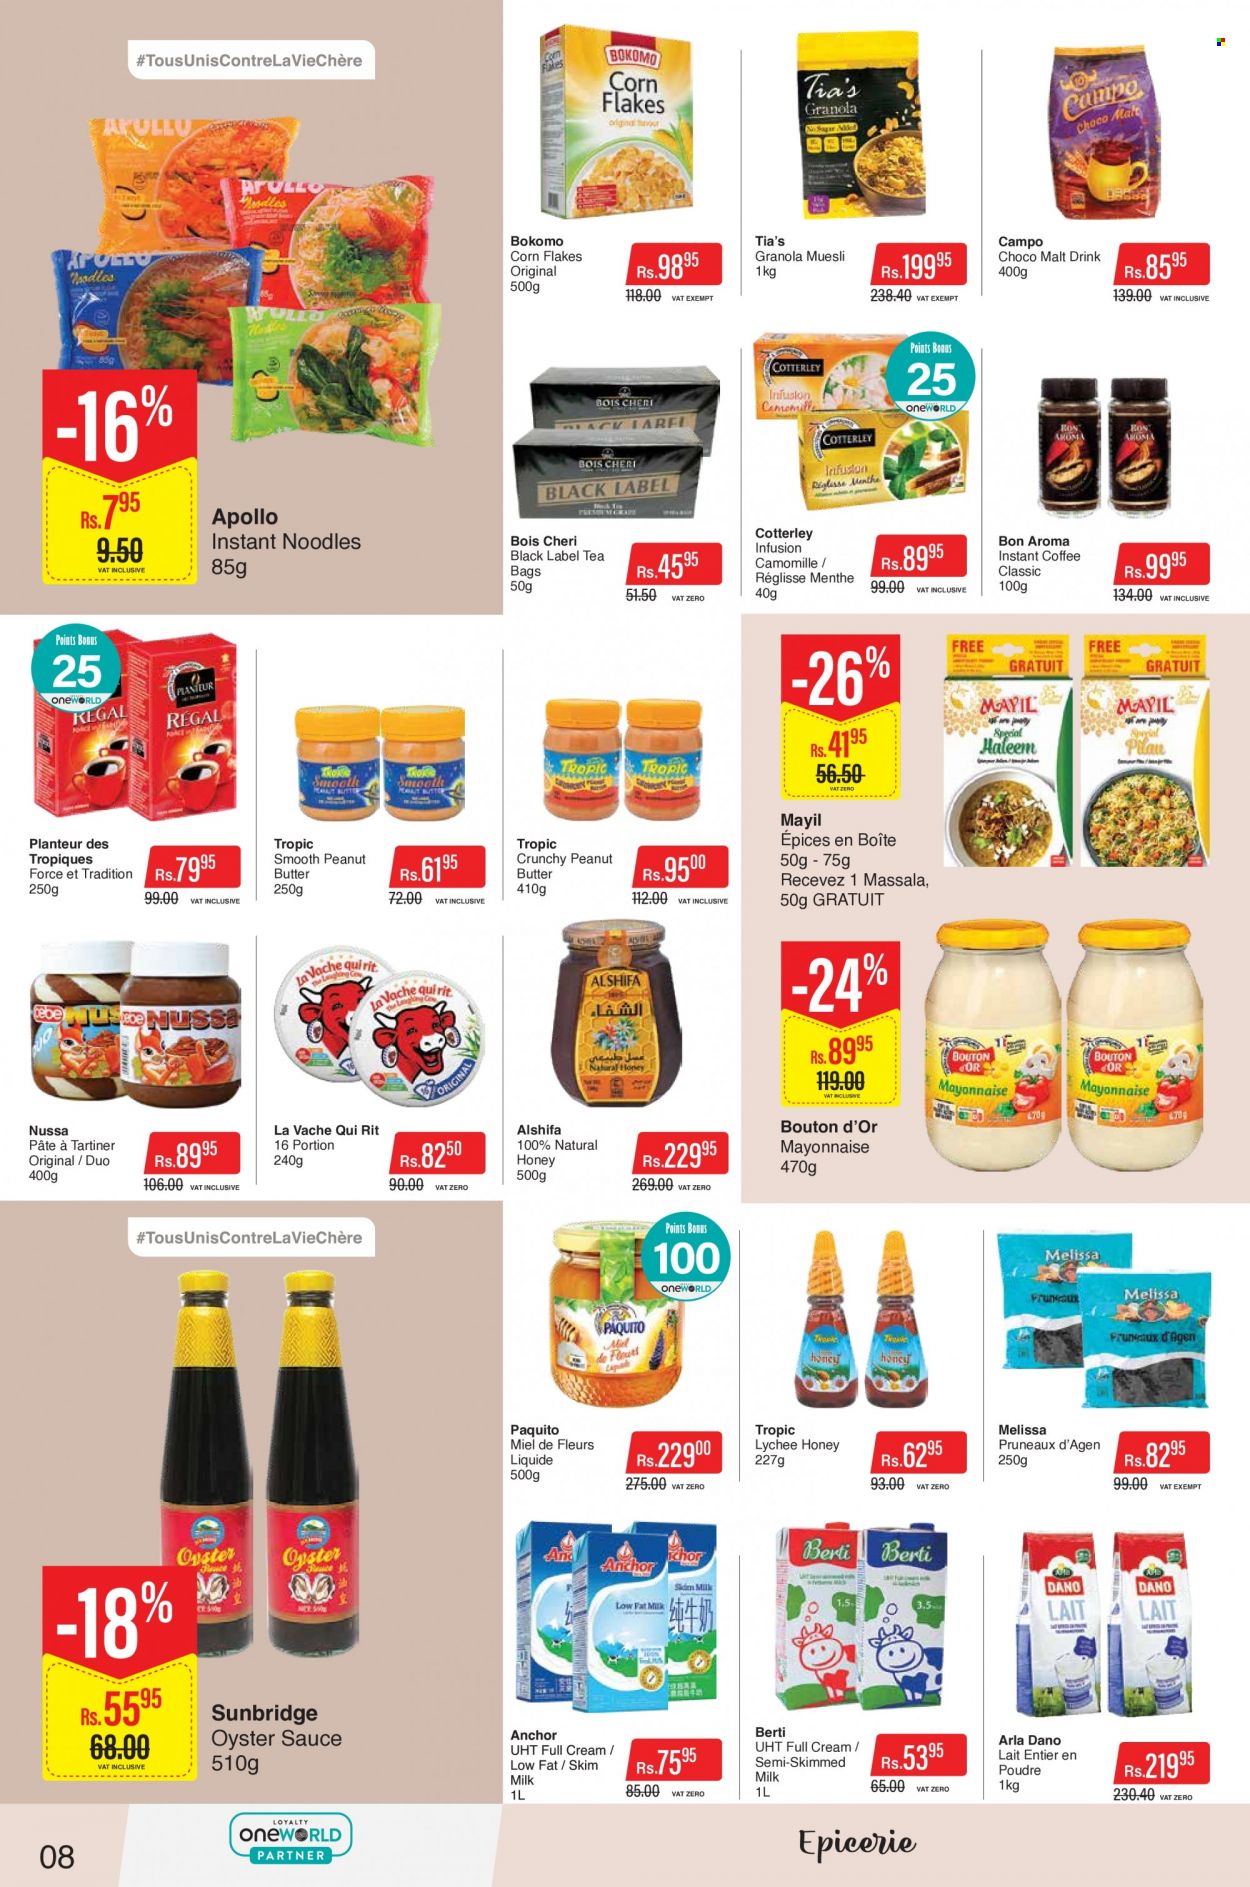 thumbnail - Intermart Catalogue - 9.09.2022 - 21.09.2022 - Sales products - lychee, oysters, instant noodles, sauce, noodles, The Laughing Cow, Arla, milk, mayonnaise, malt, corn flakes, muesli, oyster sauce, honey, tea bags, instant coffee, granola. Page 8.